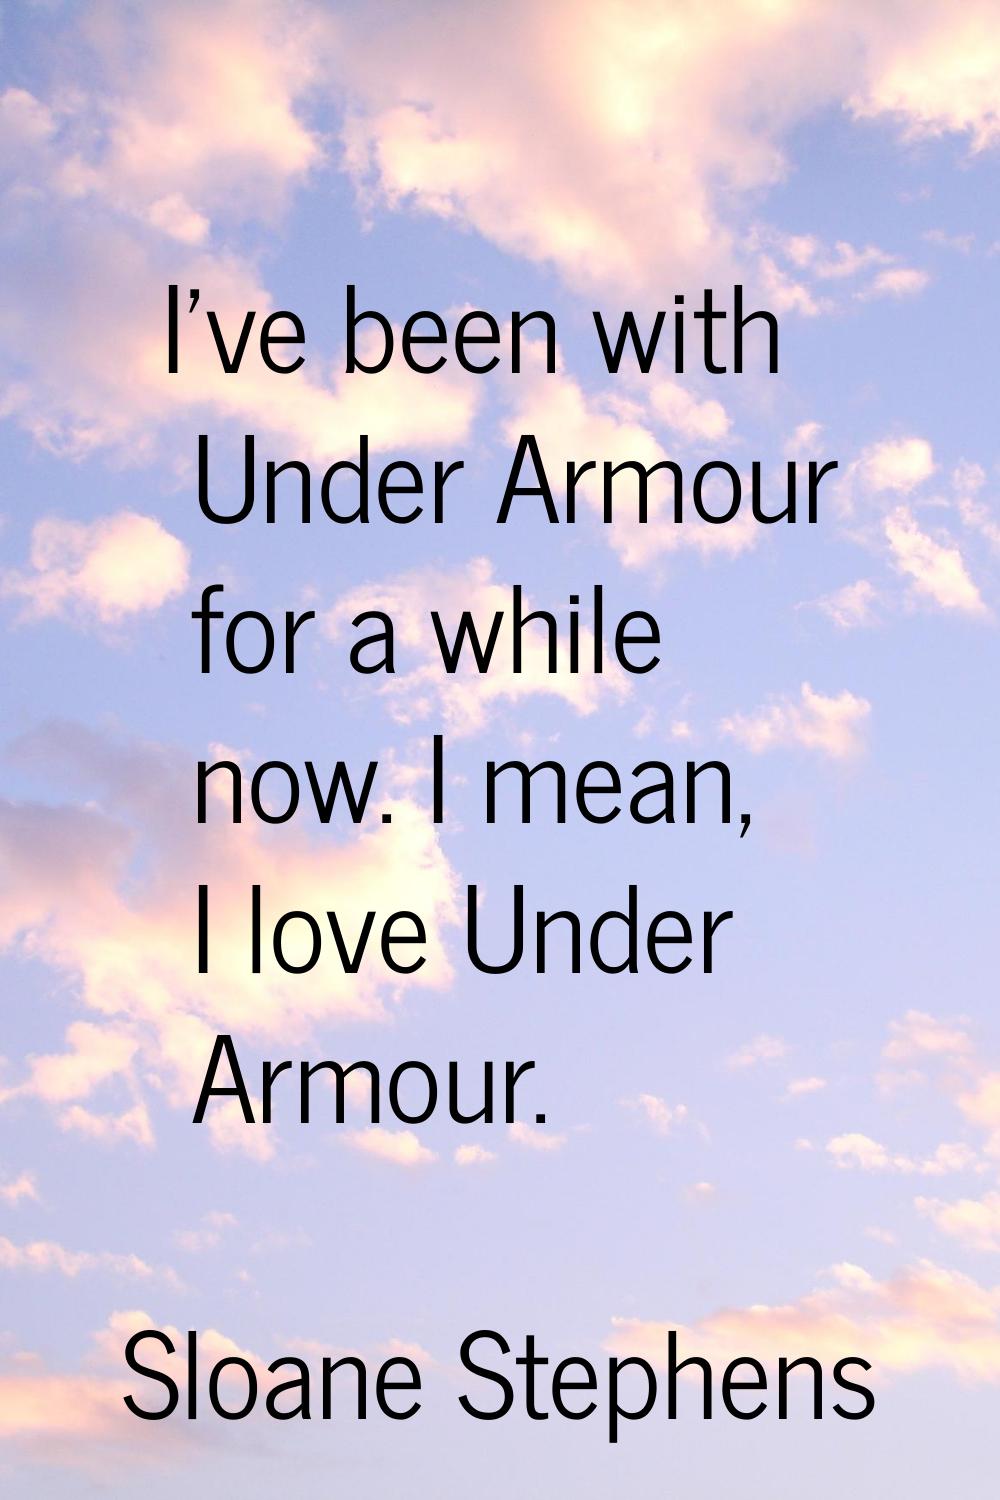 I've been with Under Armour for a while now. I mean, I love Under Armour.